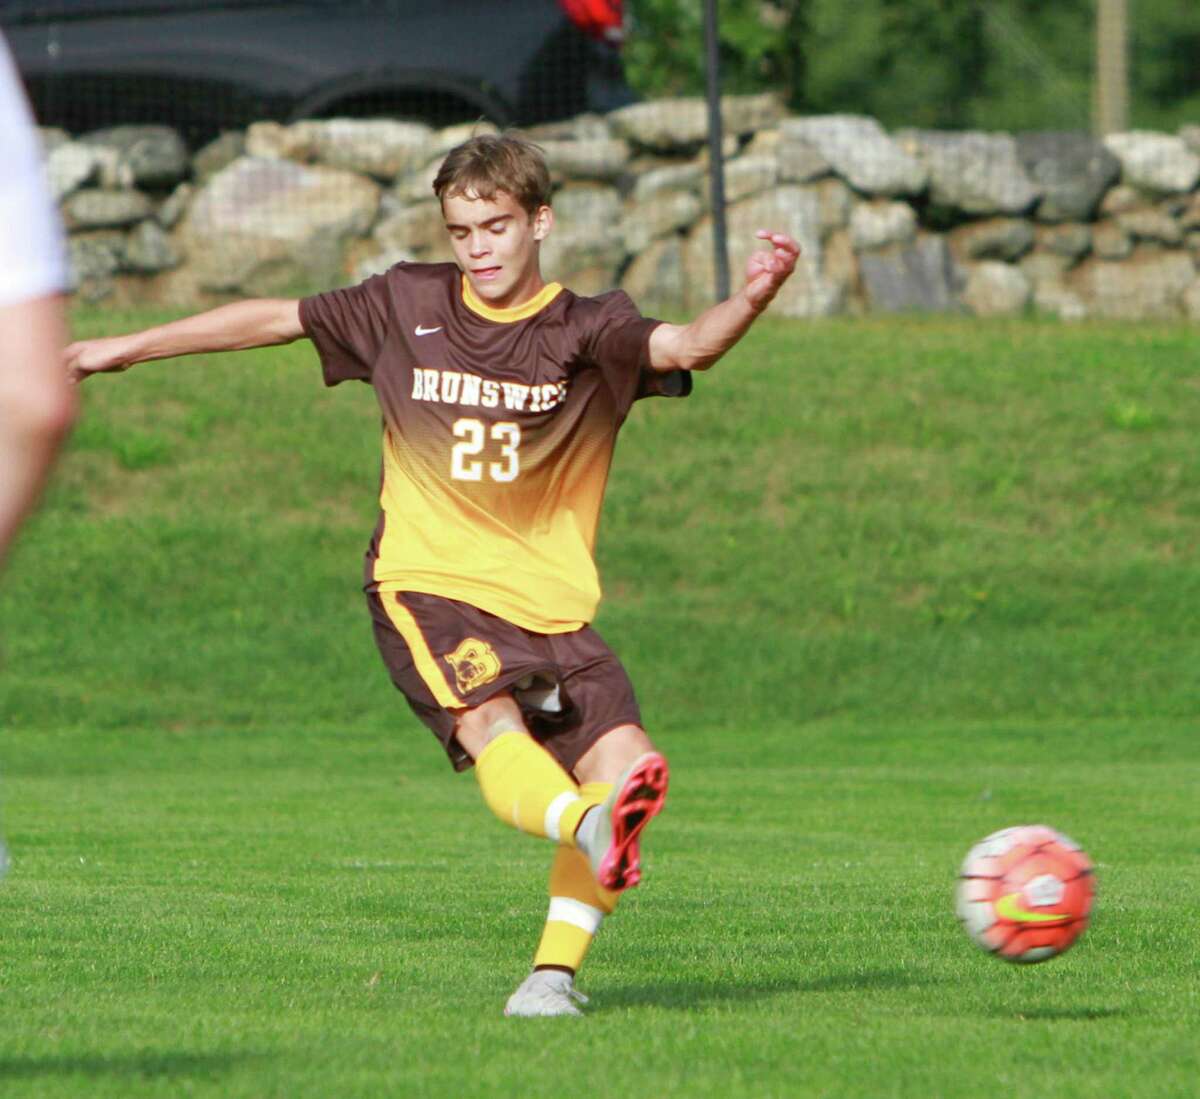 Brunswick Will Sands scores from the outside against Loomis Caffee during a varsity soccer match at Brunswick Academy in Greenwich, Conn. on Sept. 21, 2015. Brunswick defeated Loomis Chaffee 4-1.